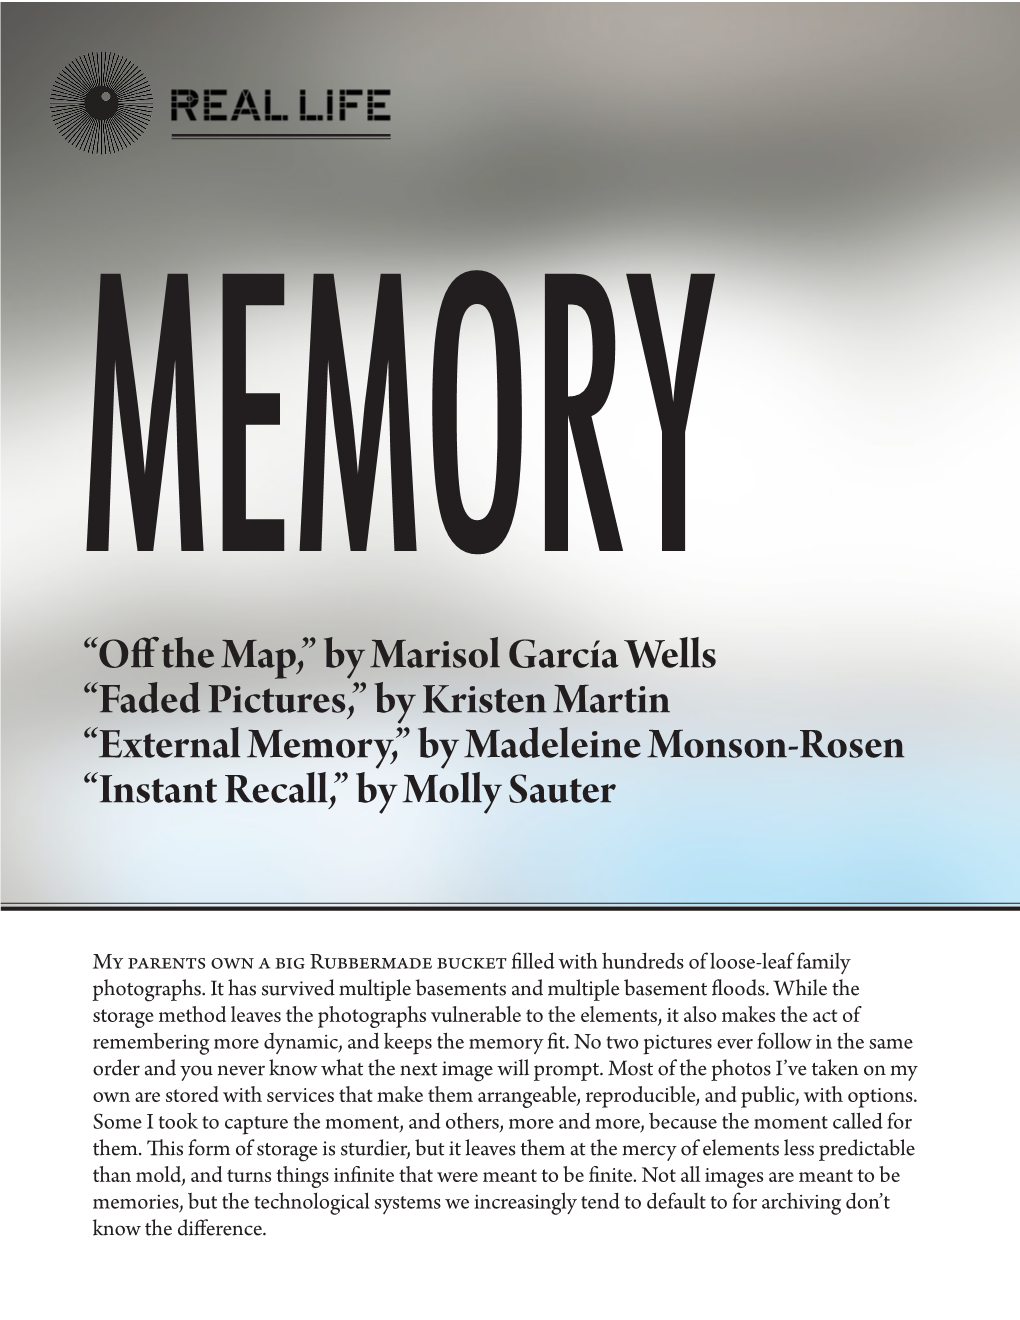 “Off the Map,” by Marisol García Wells “Faded Pictures,” by Kristen Martin “External Memory,” by Madeleine Monson-Rosen “Instant Recall,” by Molly Sauter